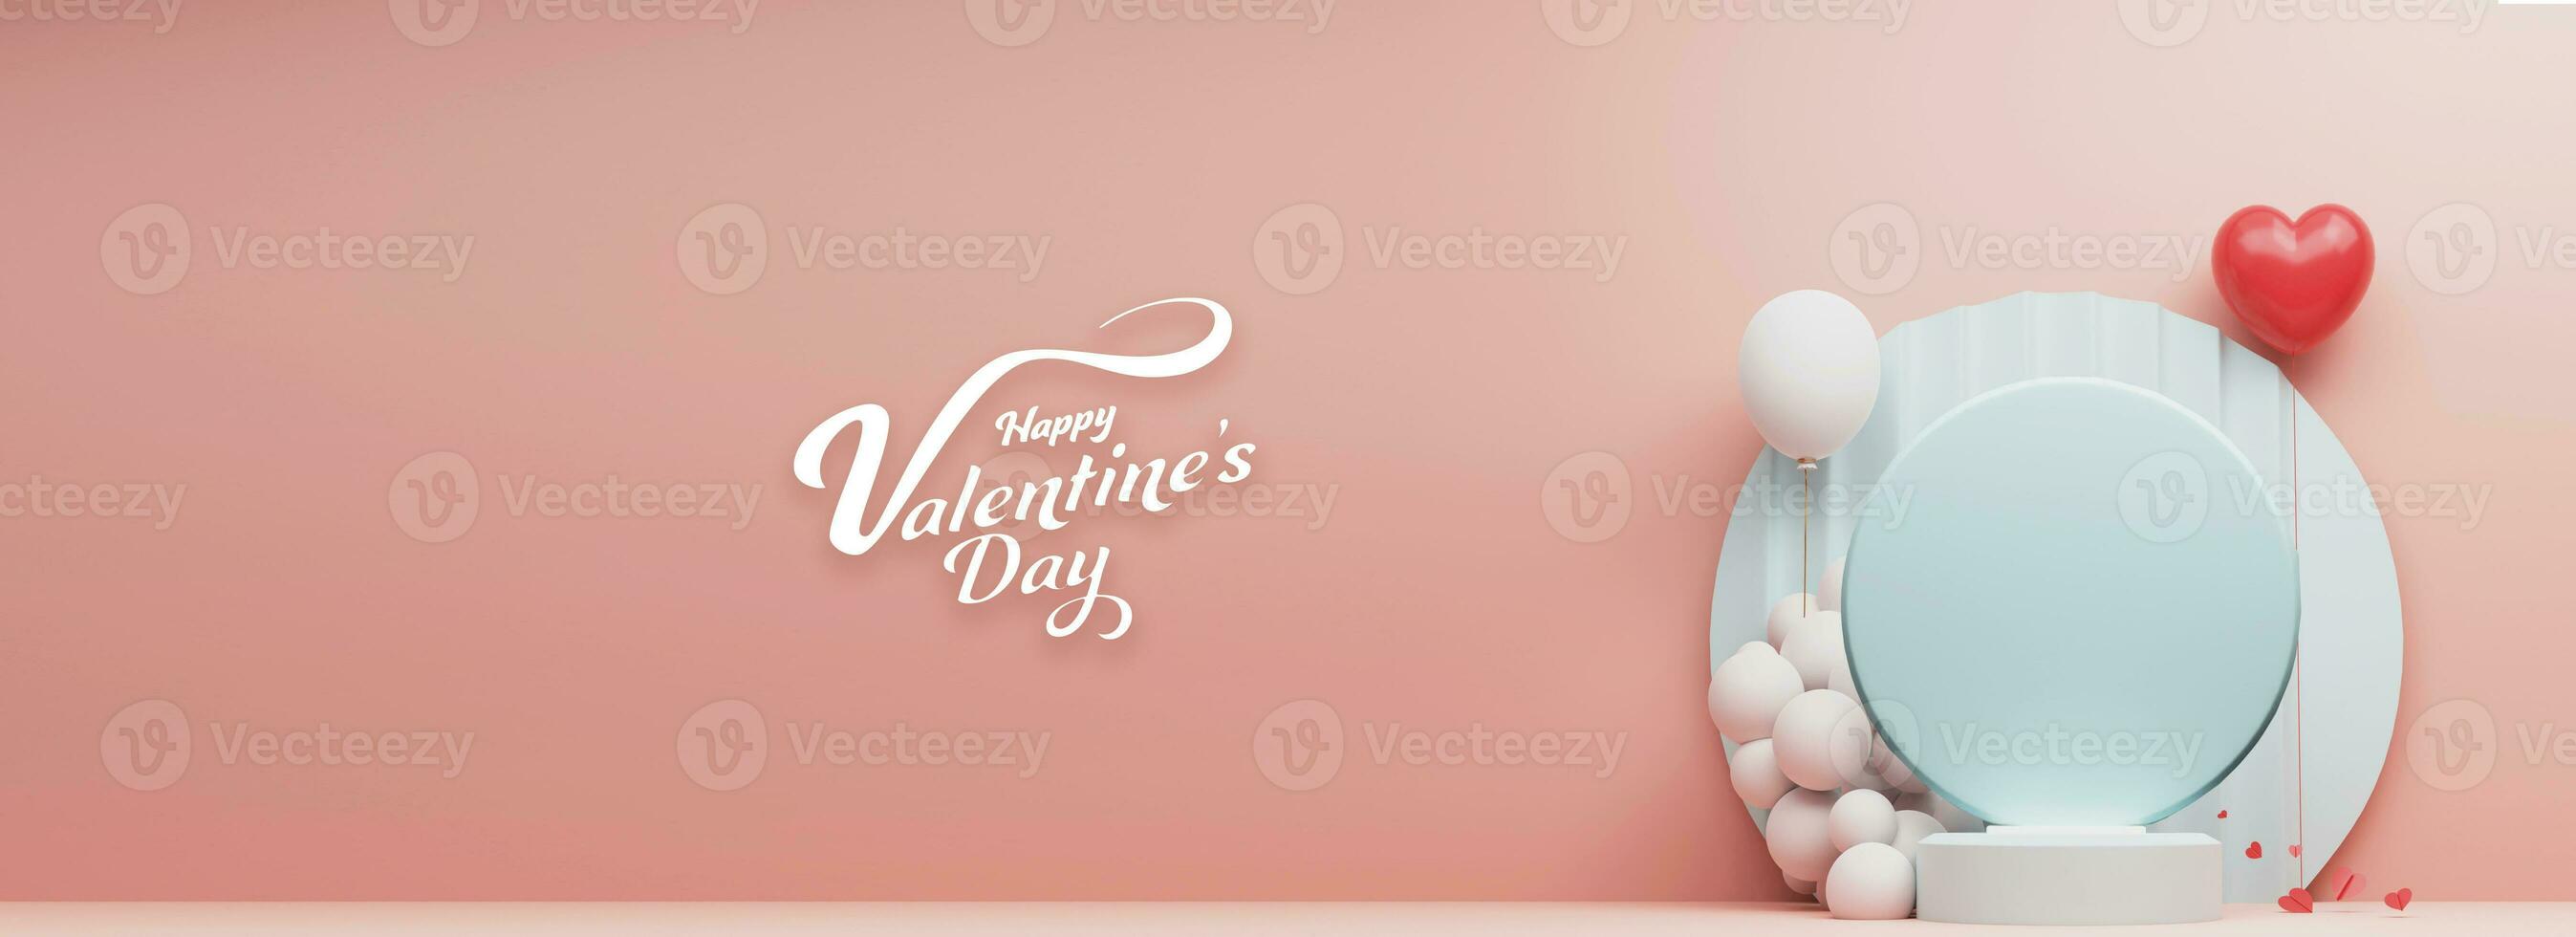 Happy Valentines Day Font With Circular Frame On Podium Space For Product Image And Realistic Balloons. photo